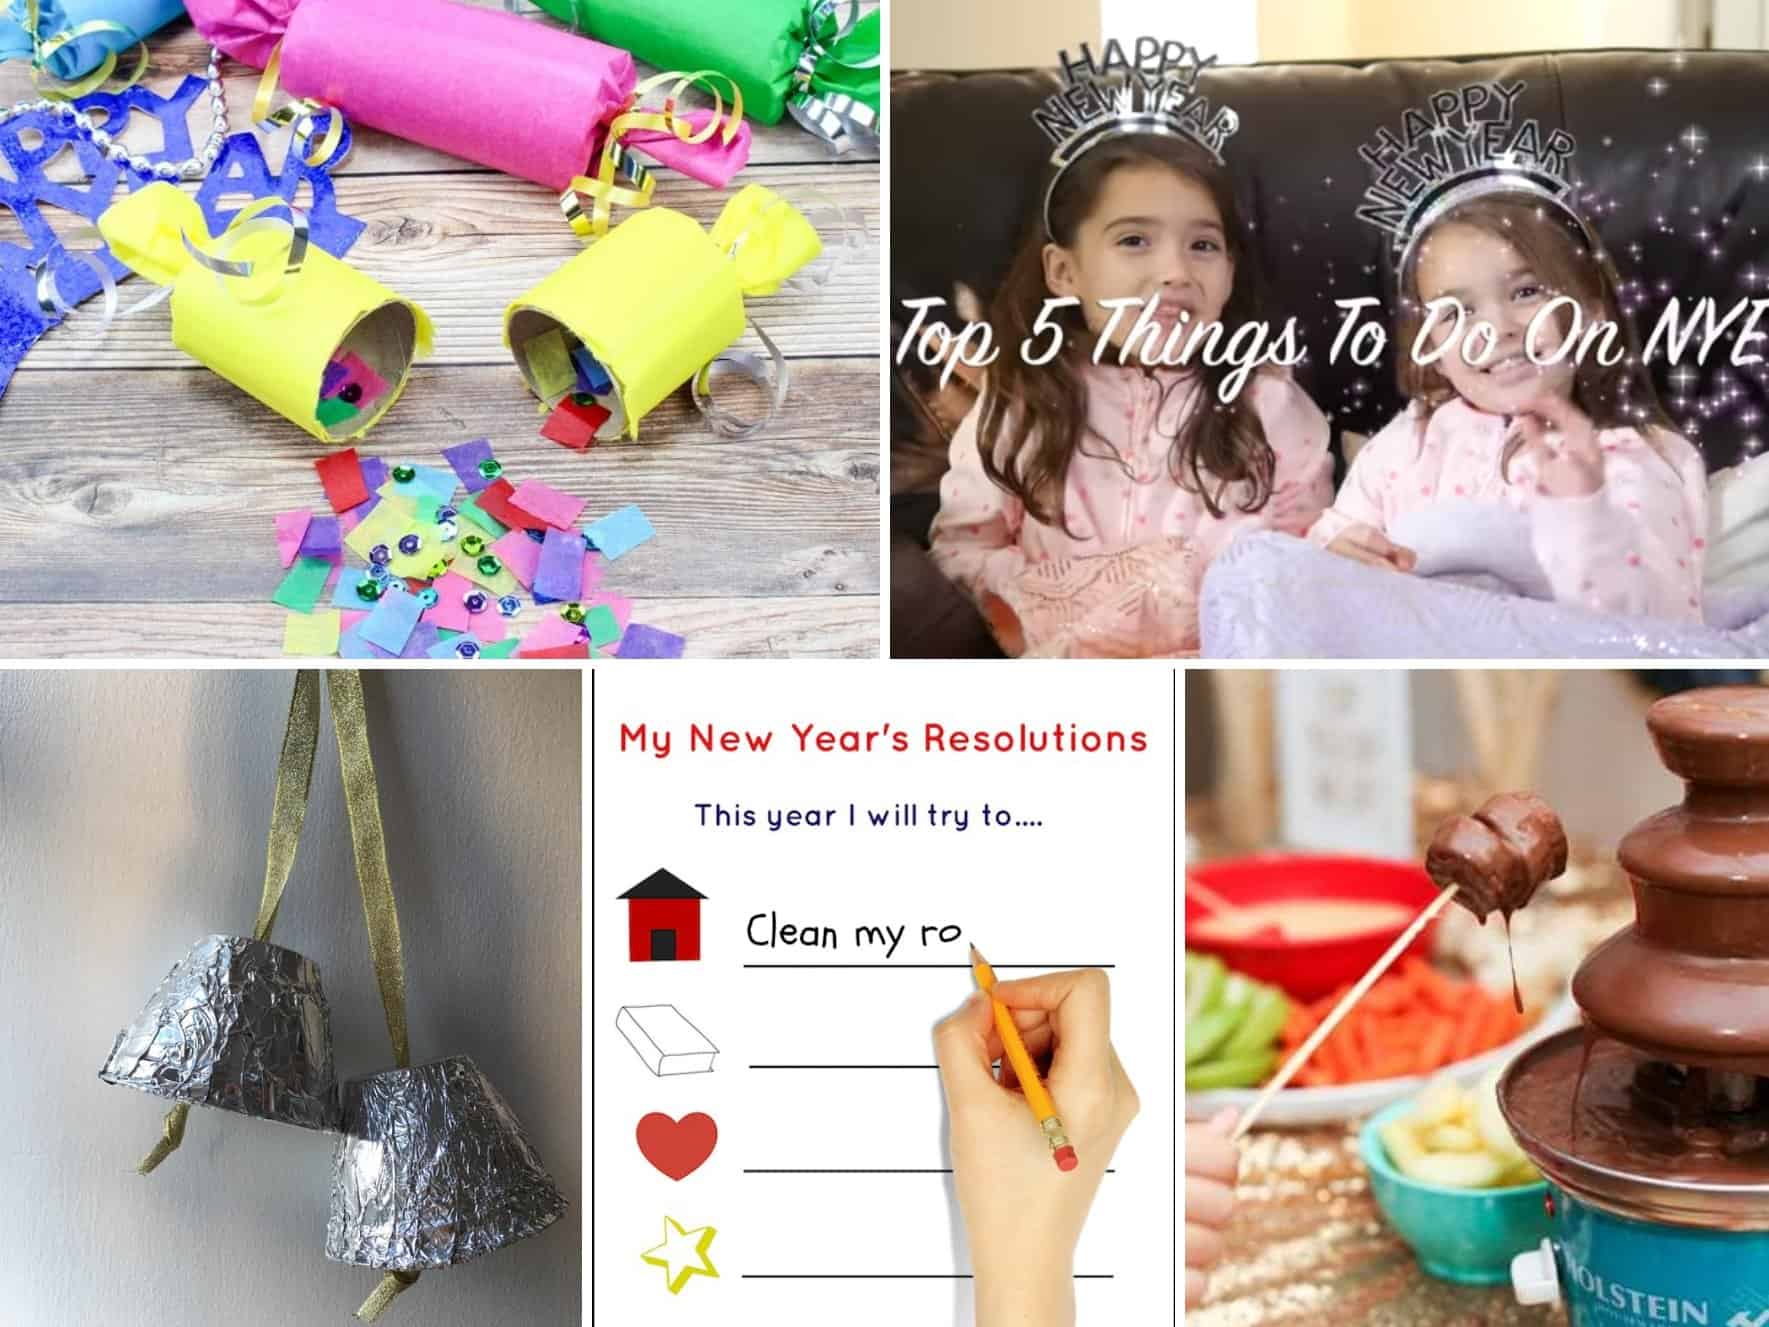 Bringing in the New Year with Your Kids